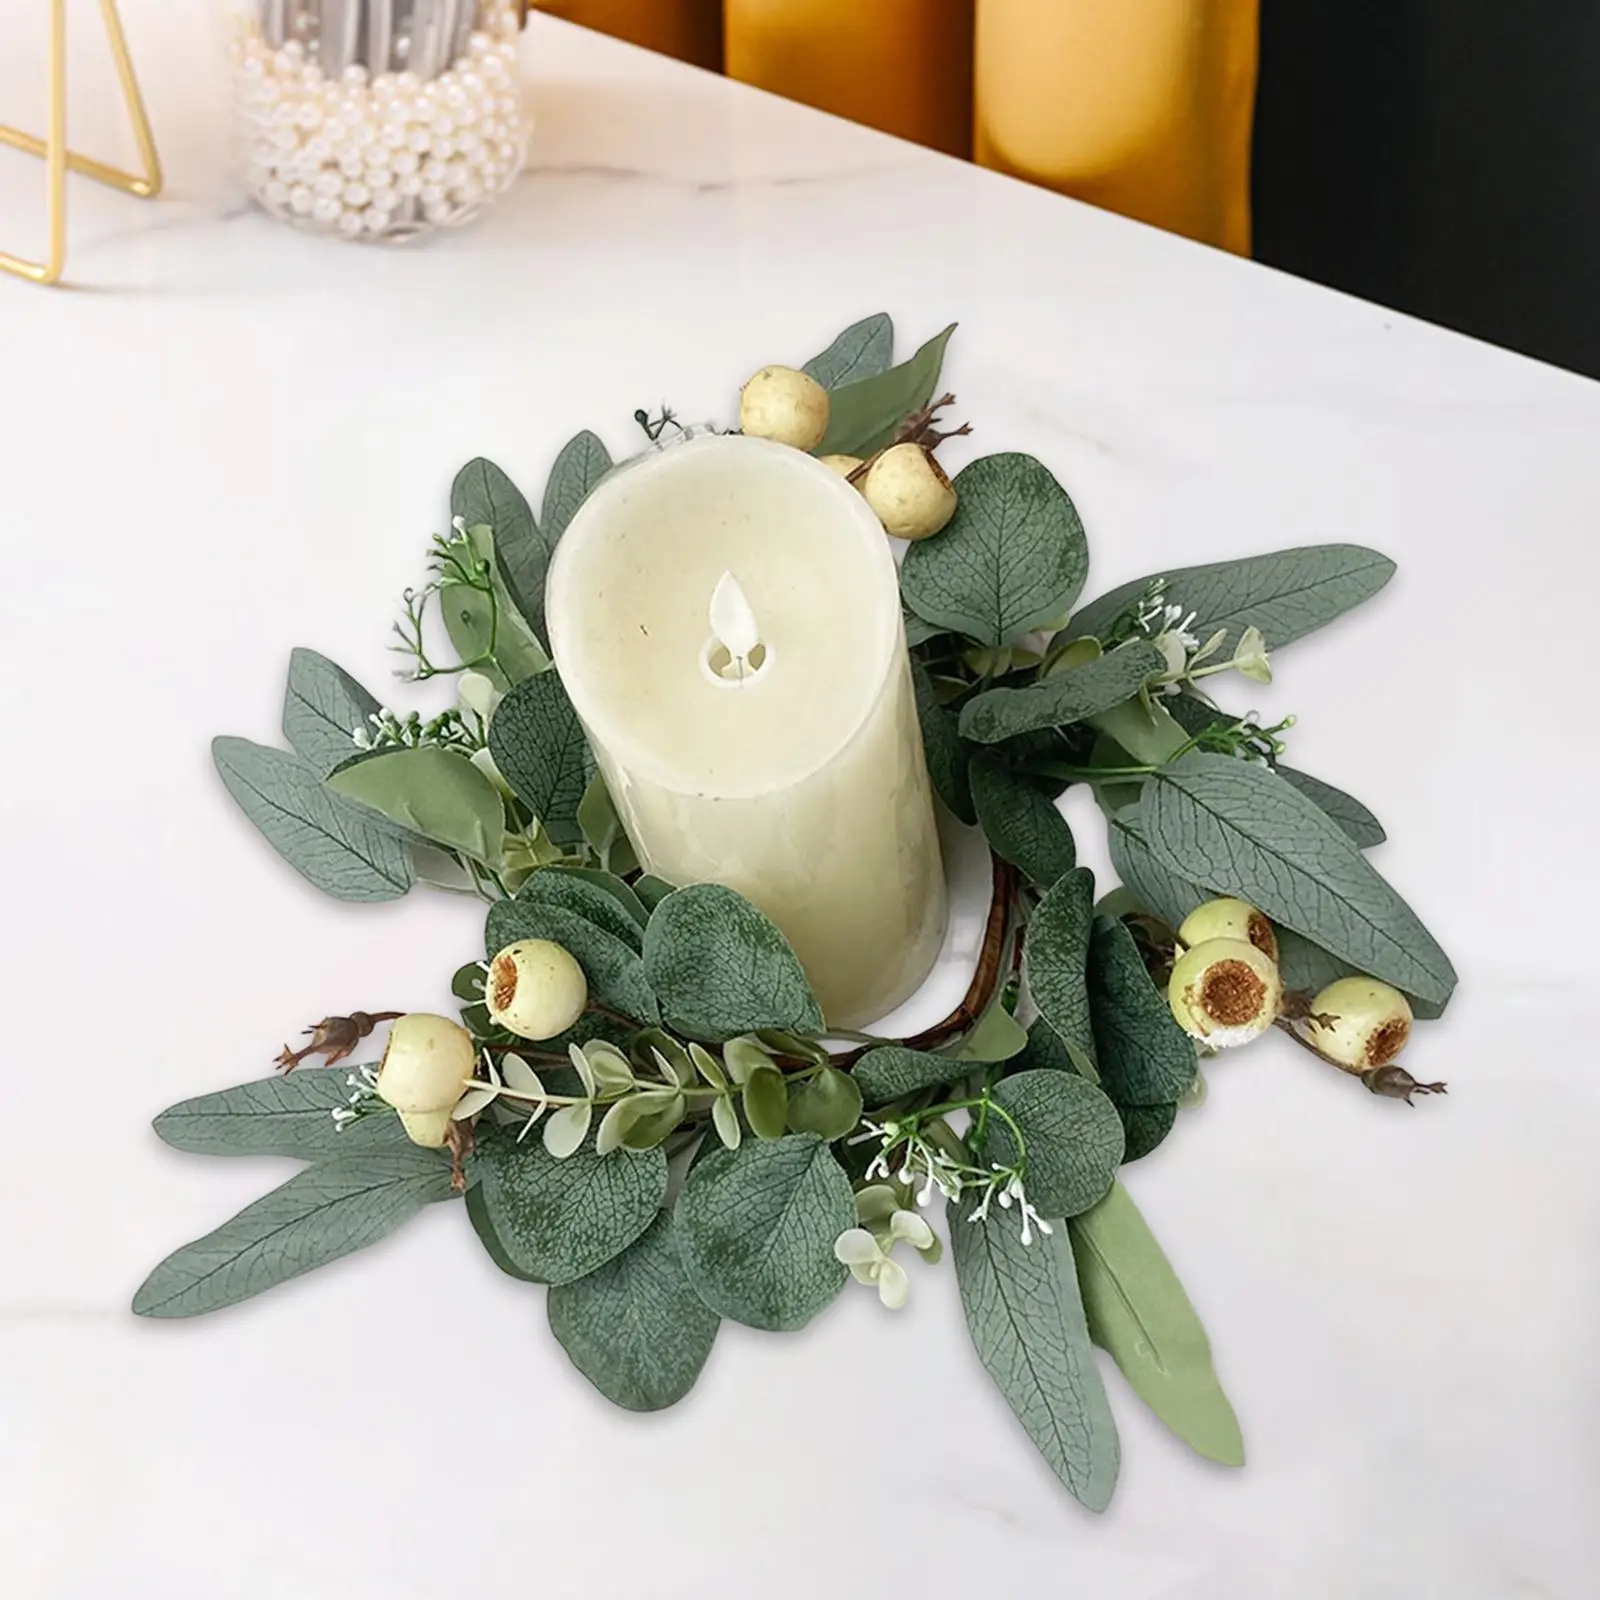 Candle Garland Ring Simulation Wreaths Table Centerpiece Candle Rings for Living Room Dining Table Tabletop Party Decor